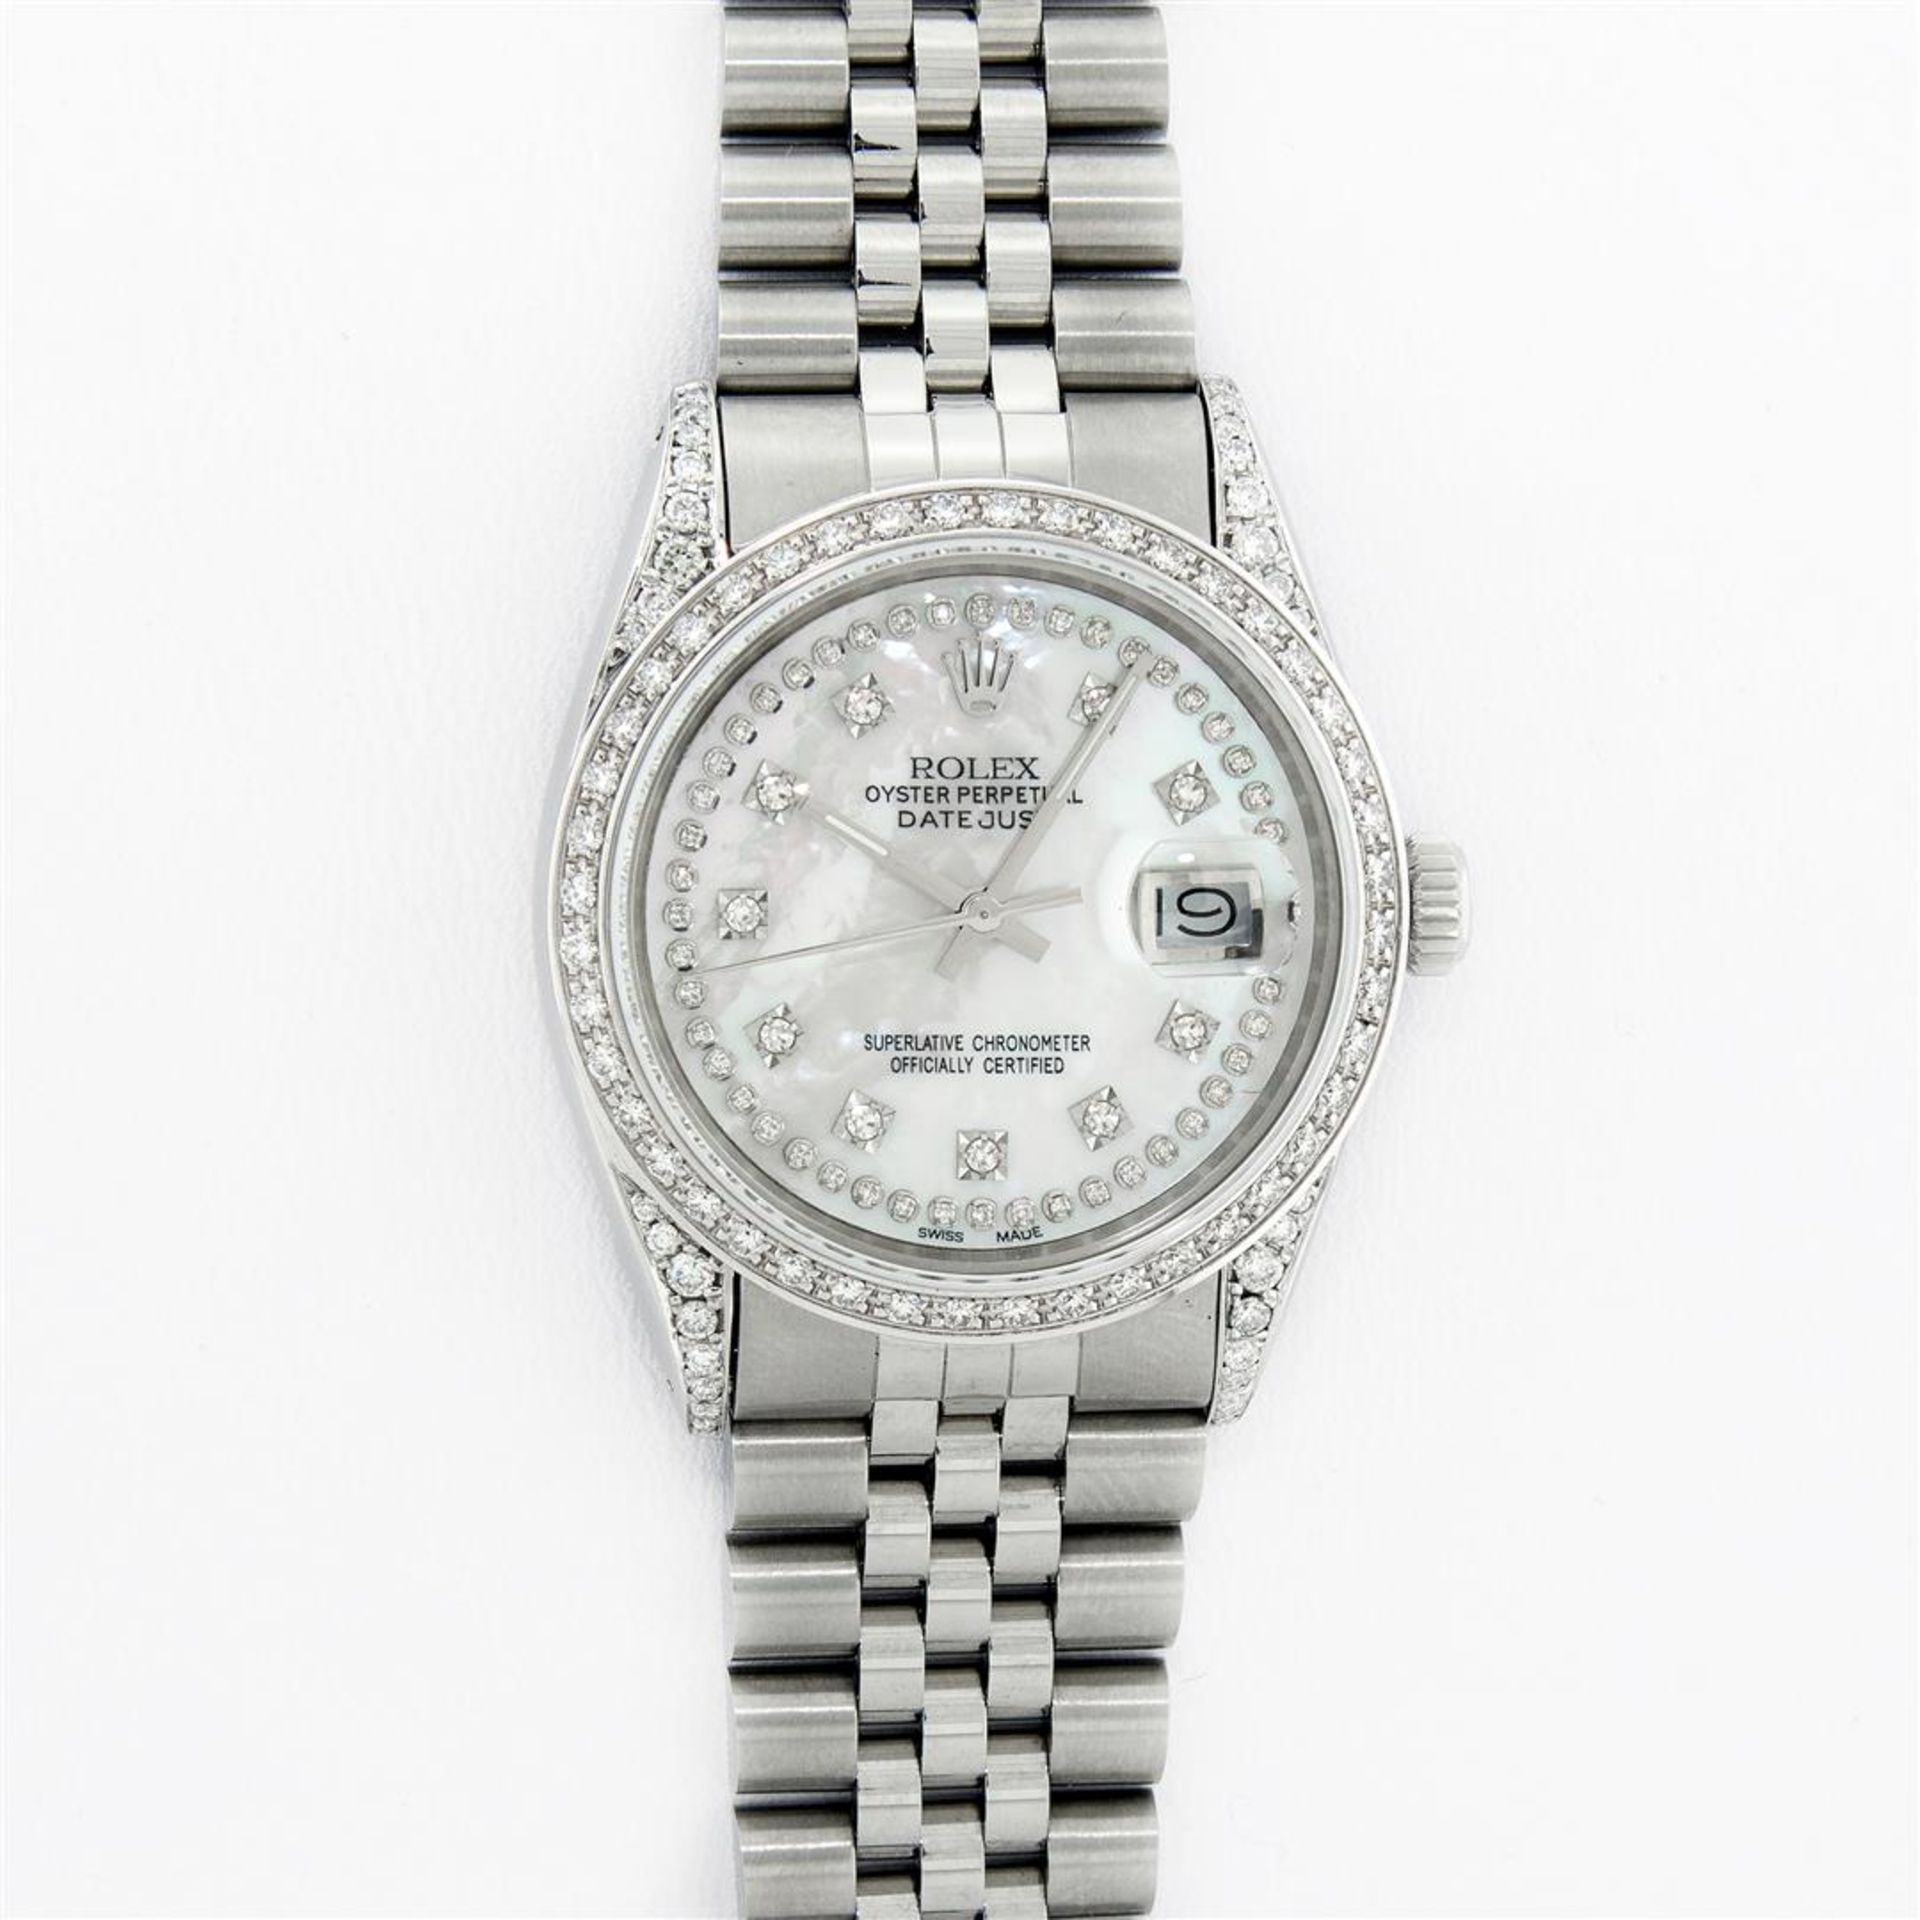 Rolex Mens Stainless Steel Mother Of Pearl Diamond Lugs Datejust Wristwatch - Image 2 of 9